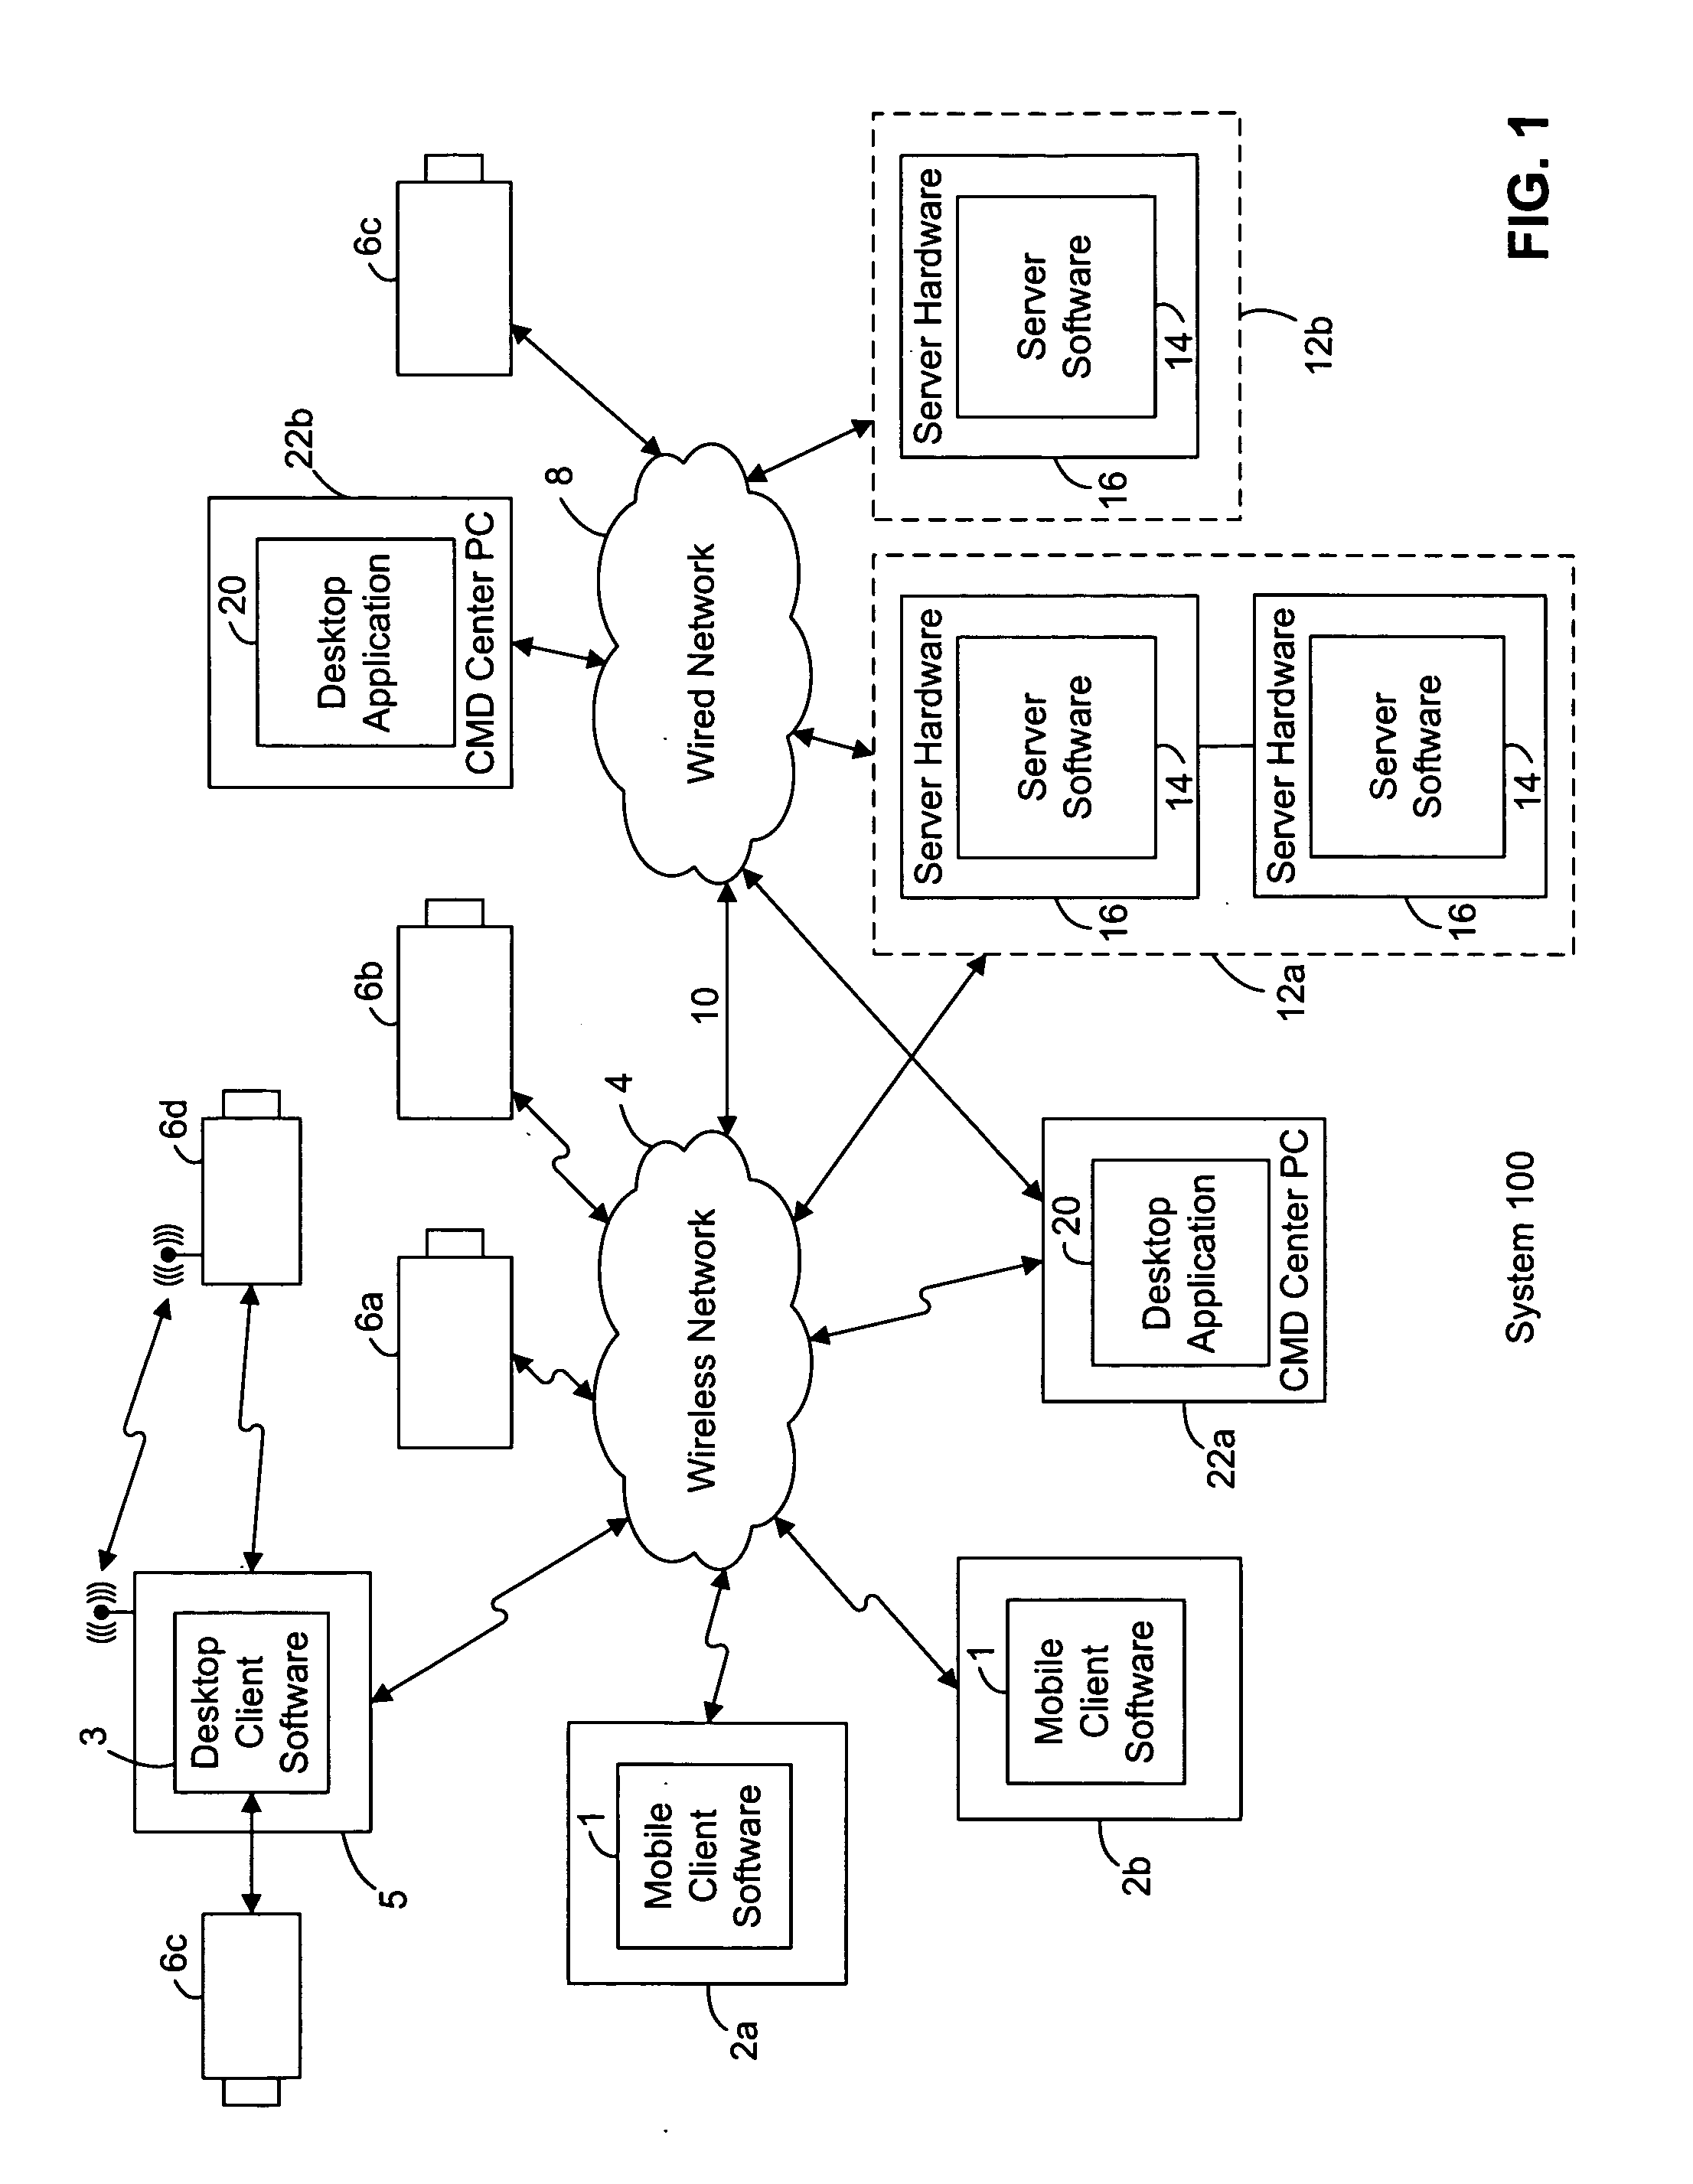 System and method for remote data acquisition and distribution